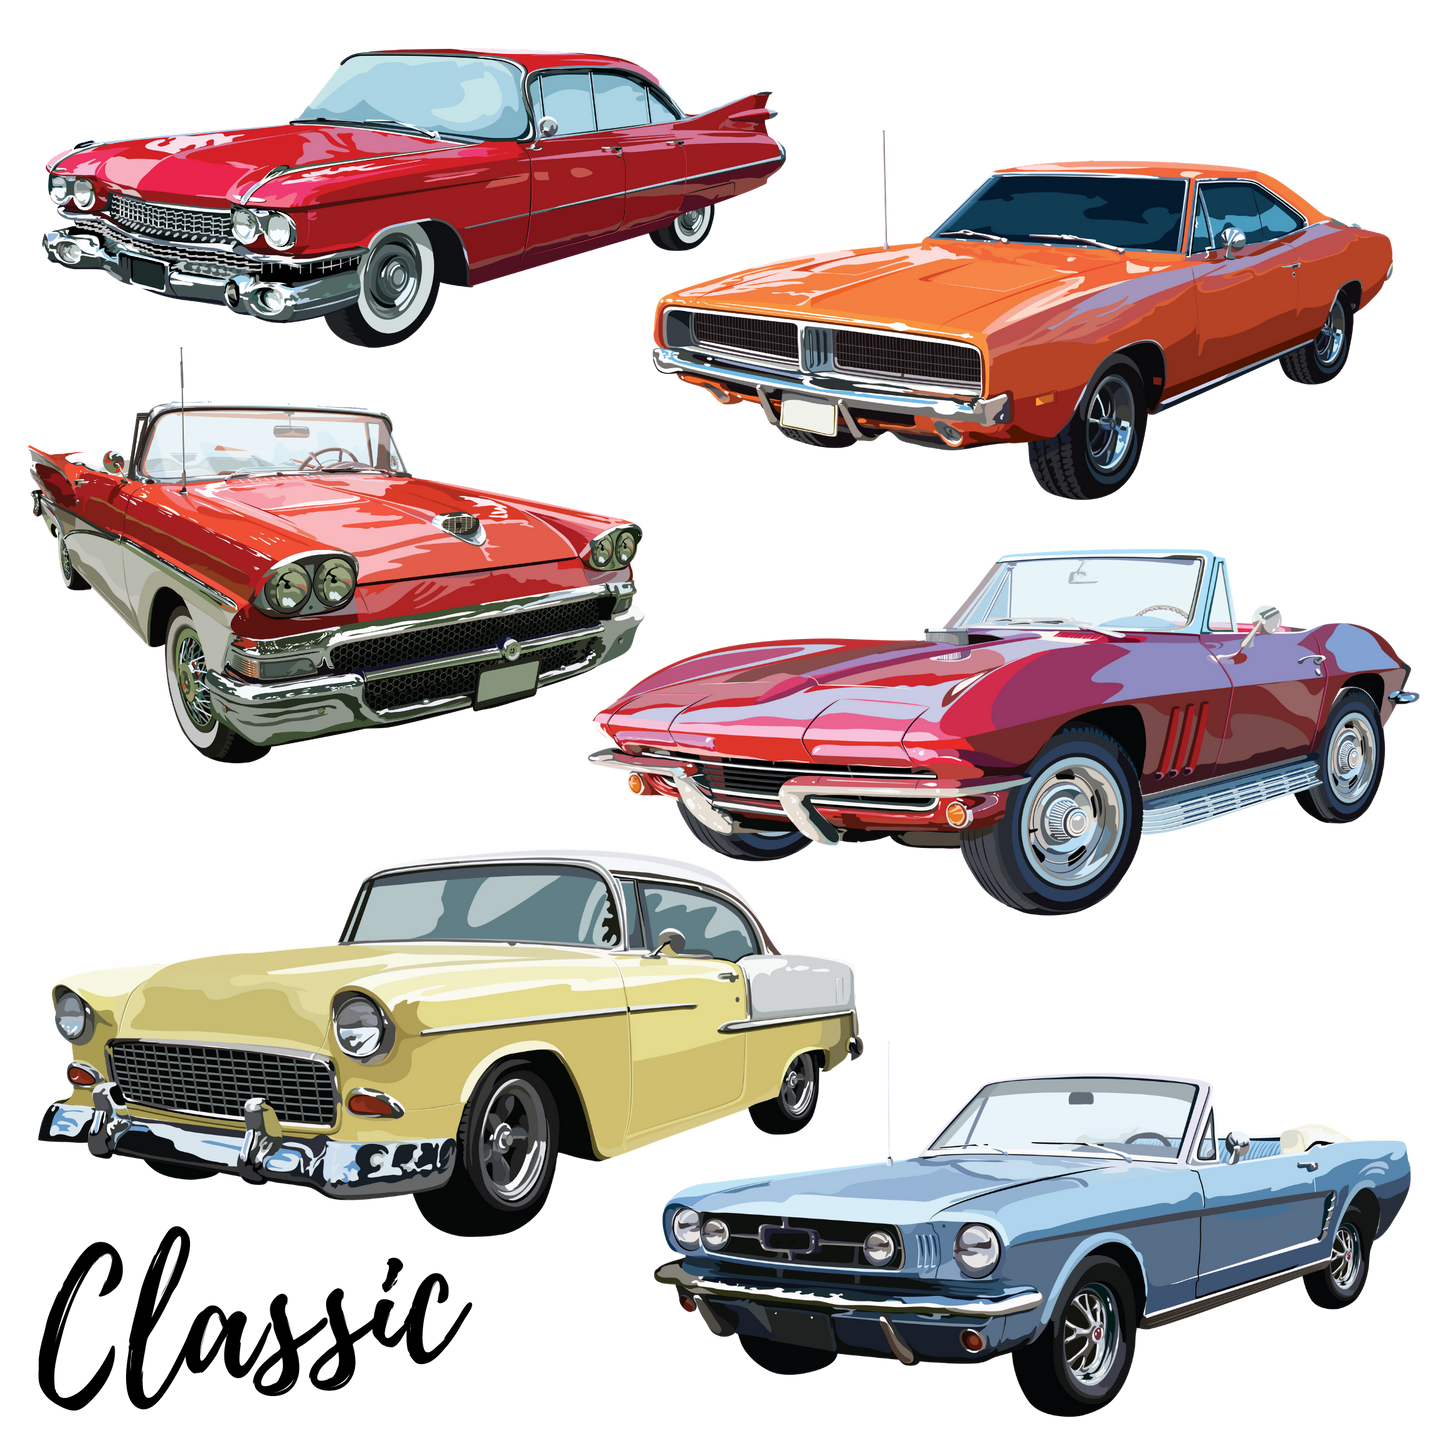 Classic Cars Half Sheet Misc. (Must Purchase 2 Half sheets - You Can Mix & Match)